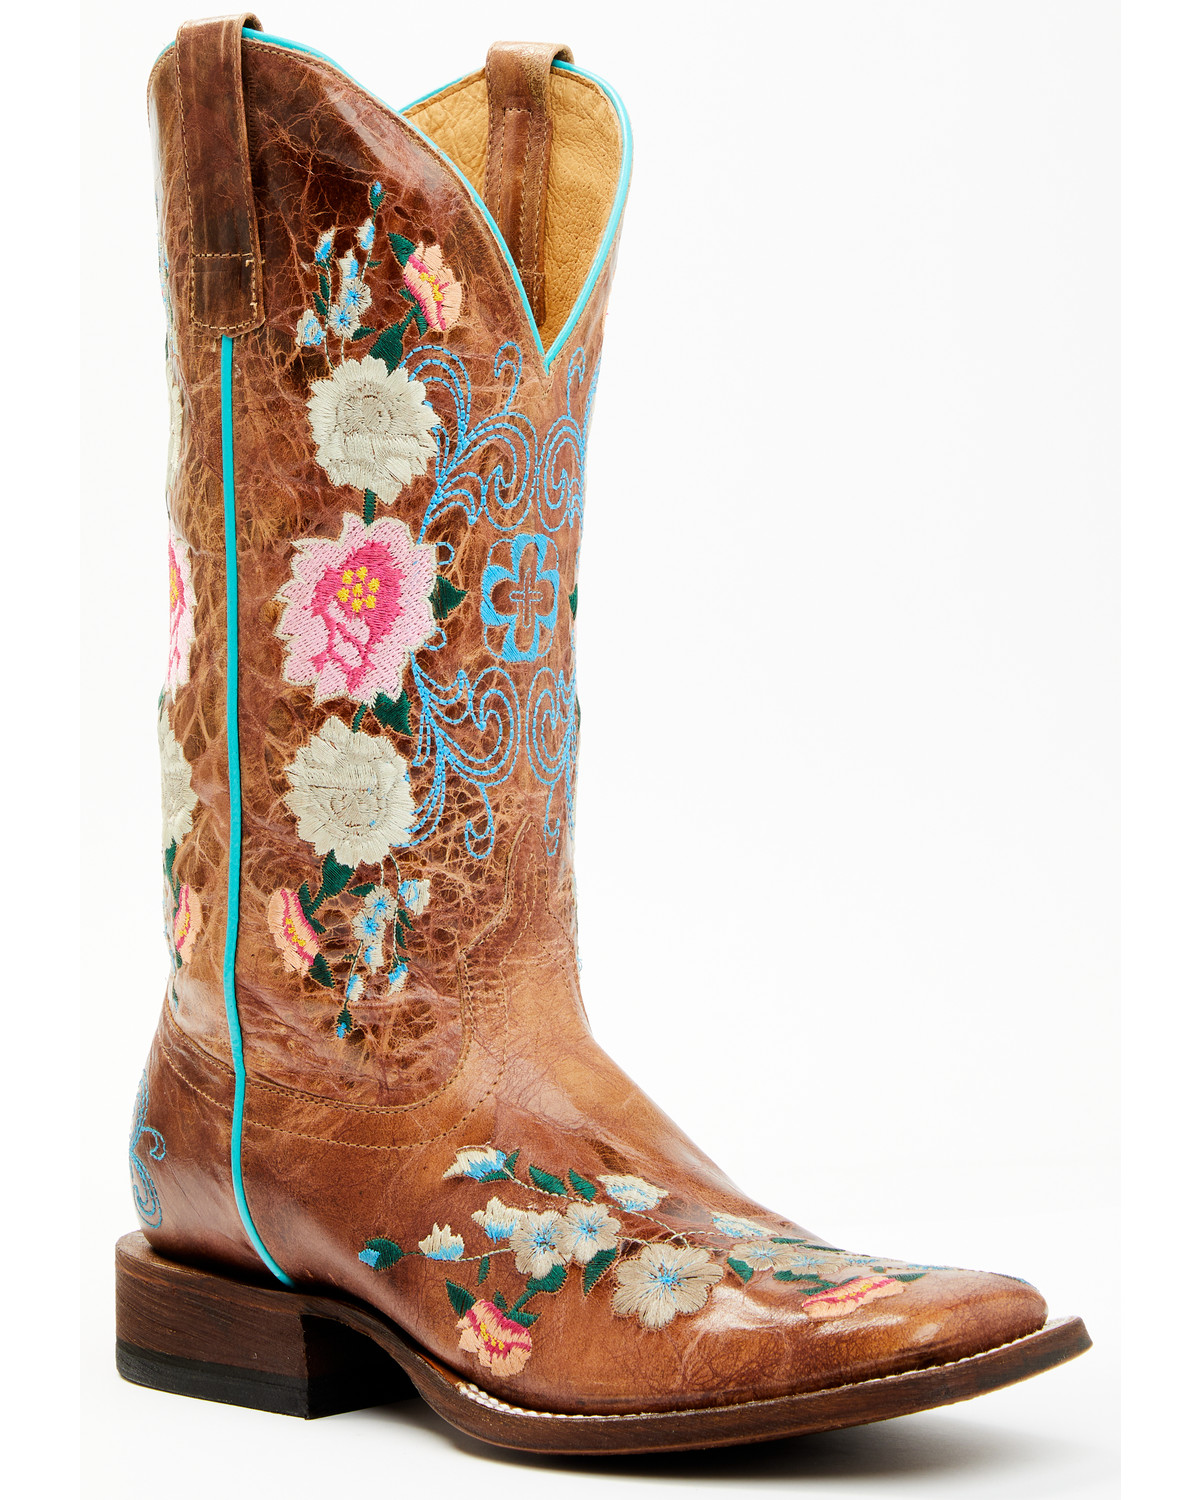 Macie Bean Rose Garden Cowgirl Boots - Square Toe | Sheplers